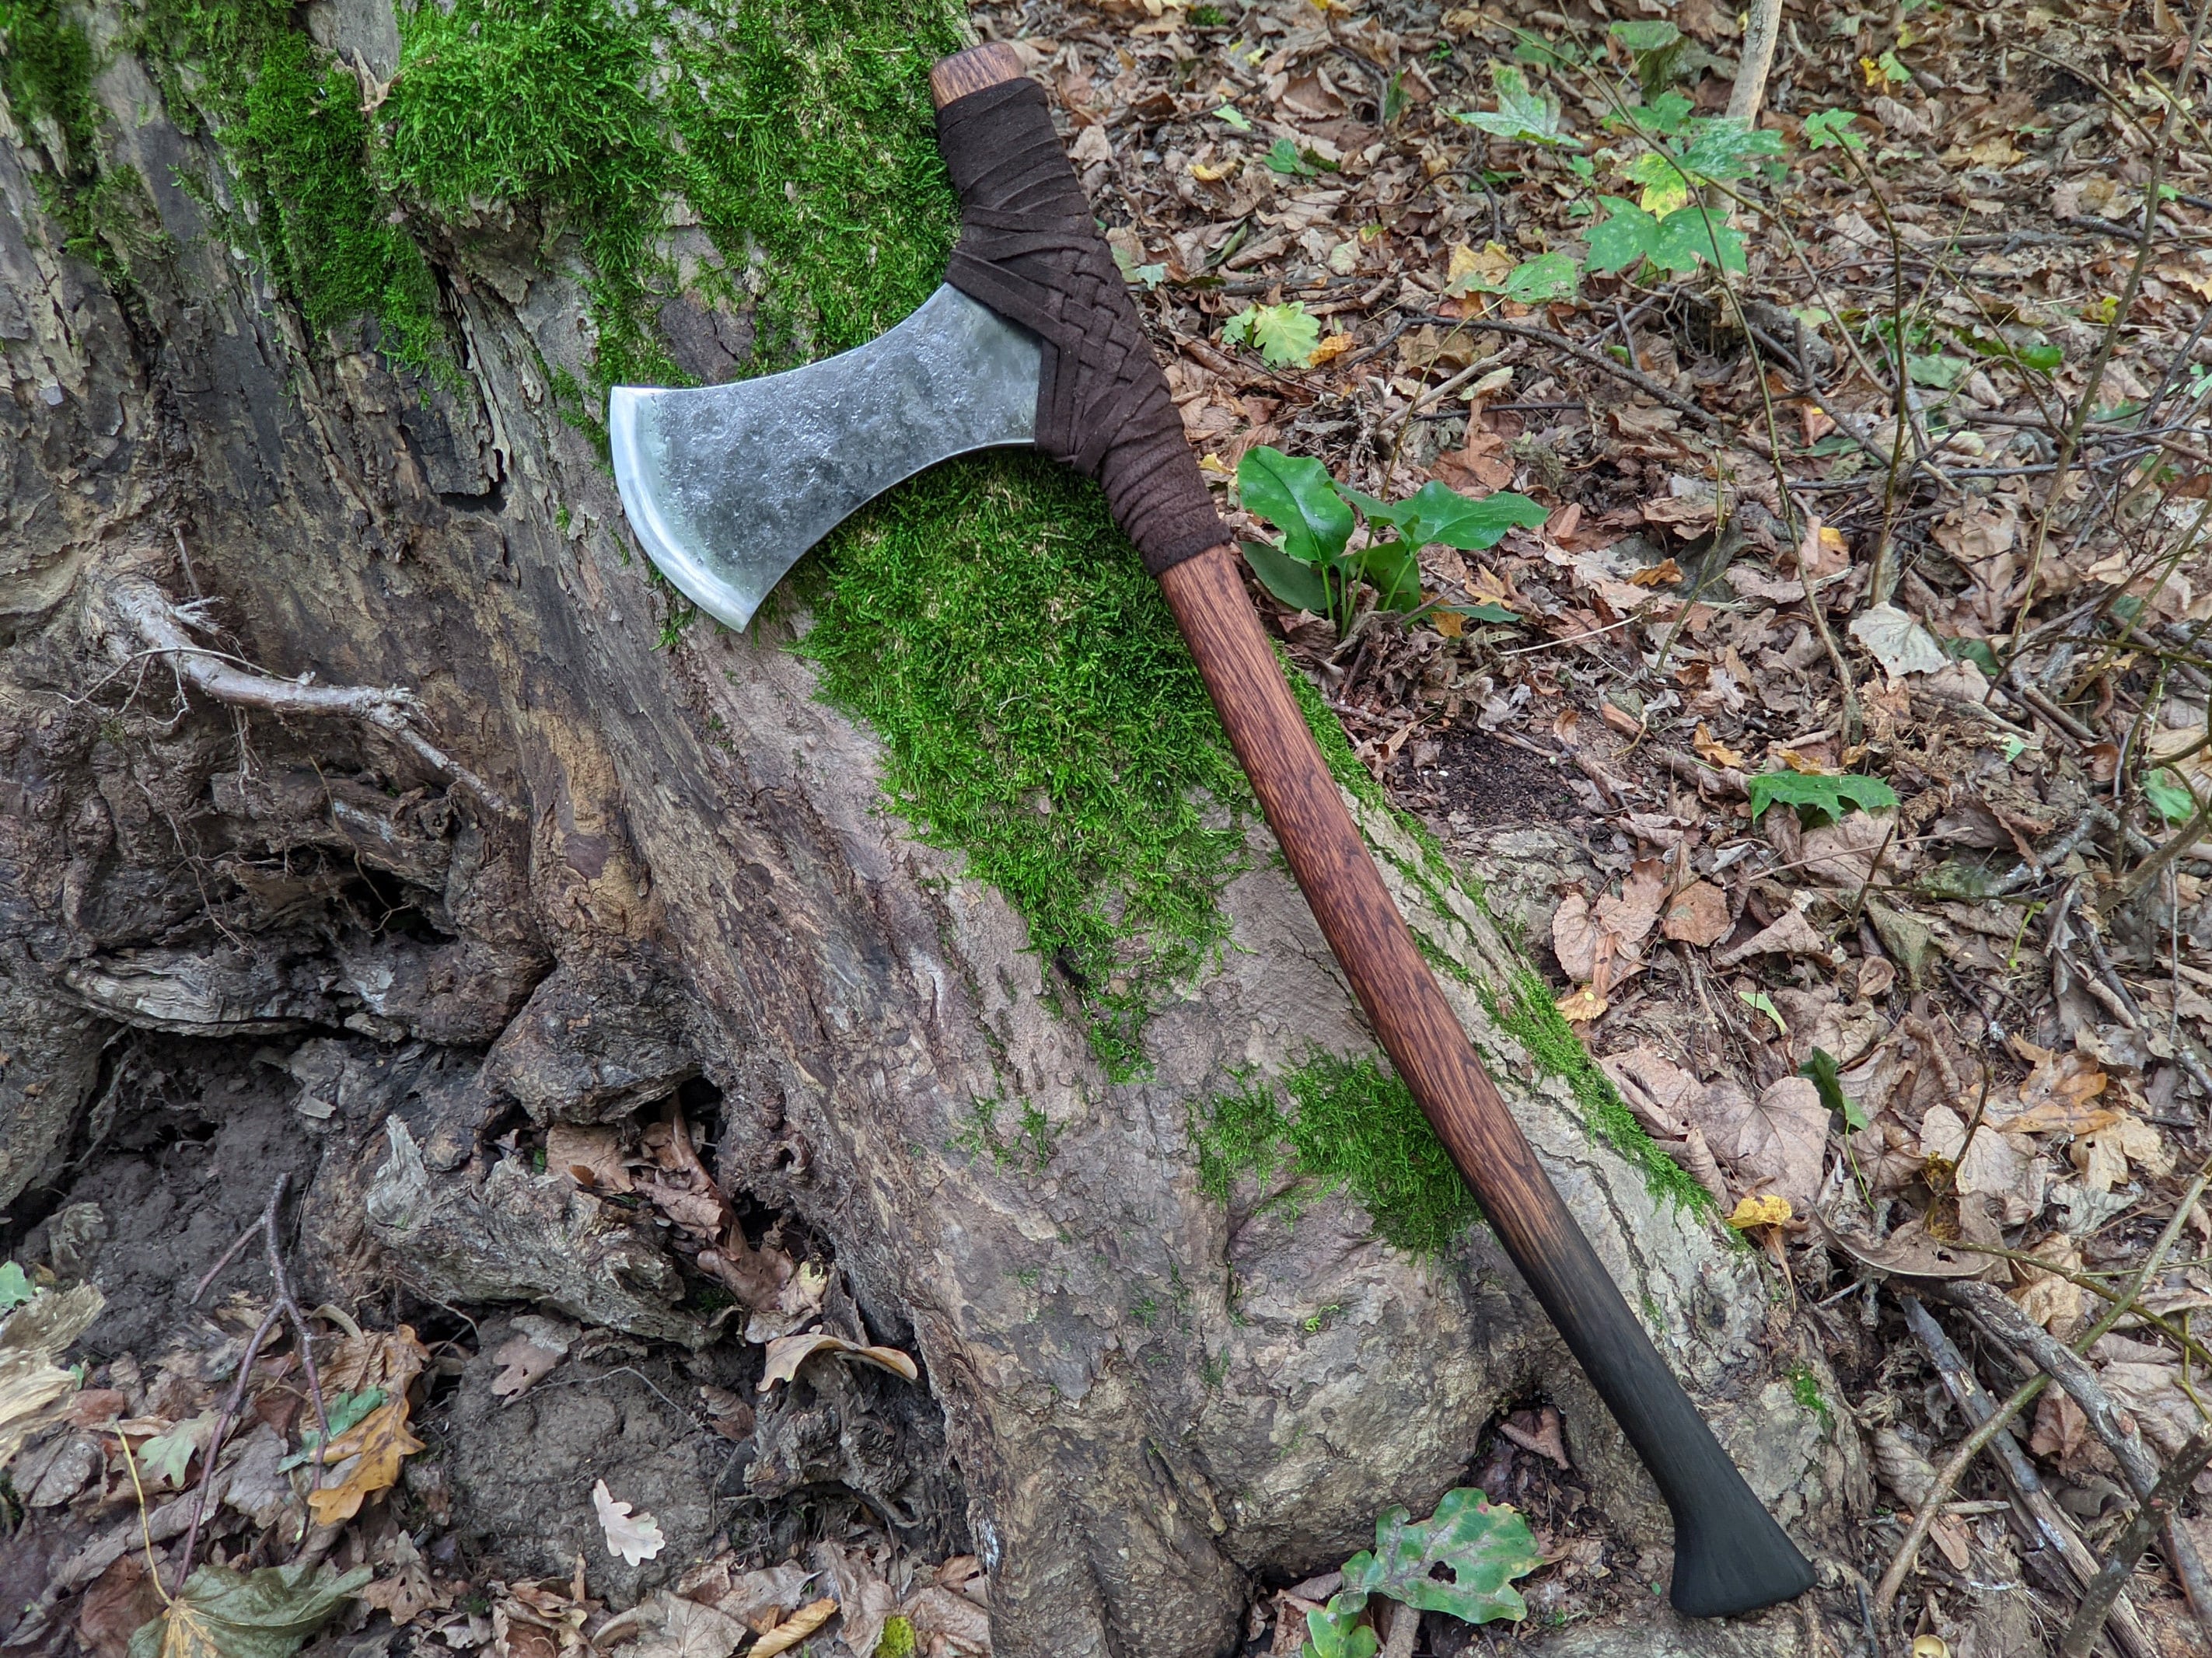 Fist Axe With Sharp Beard, Mini, Cleaver, Forged Ax, Small Hatchet